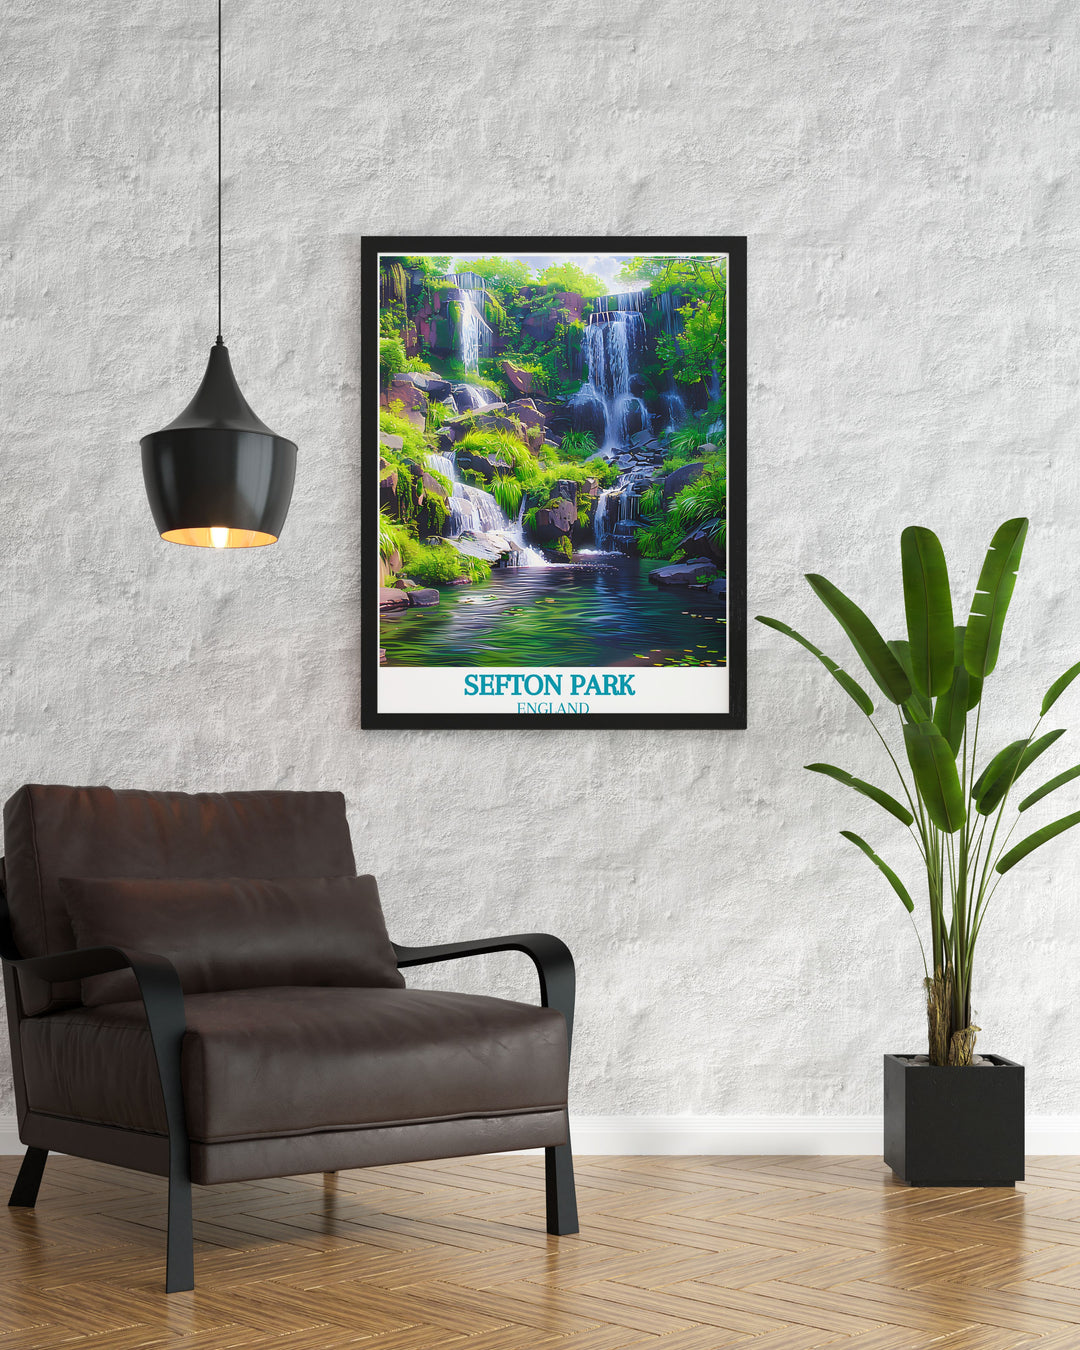 Vintage travel print showcasing Liverpools Sefton Park and the magical Fairy Glen. This wall art captures the serene beauty of these iconic locations making it an excellent gift for lovers of nature and travel. Enhance your space with this beautiful artwork.